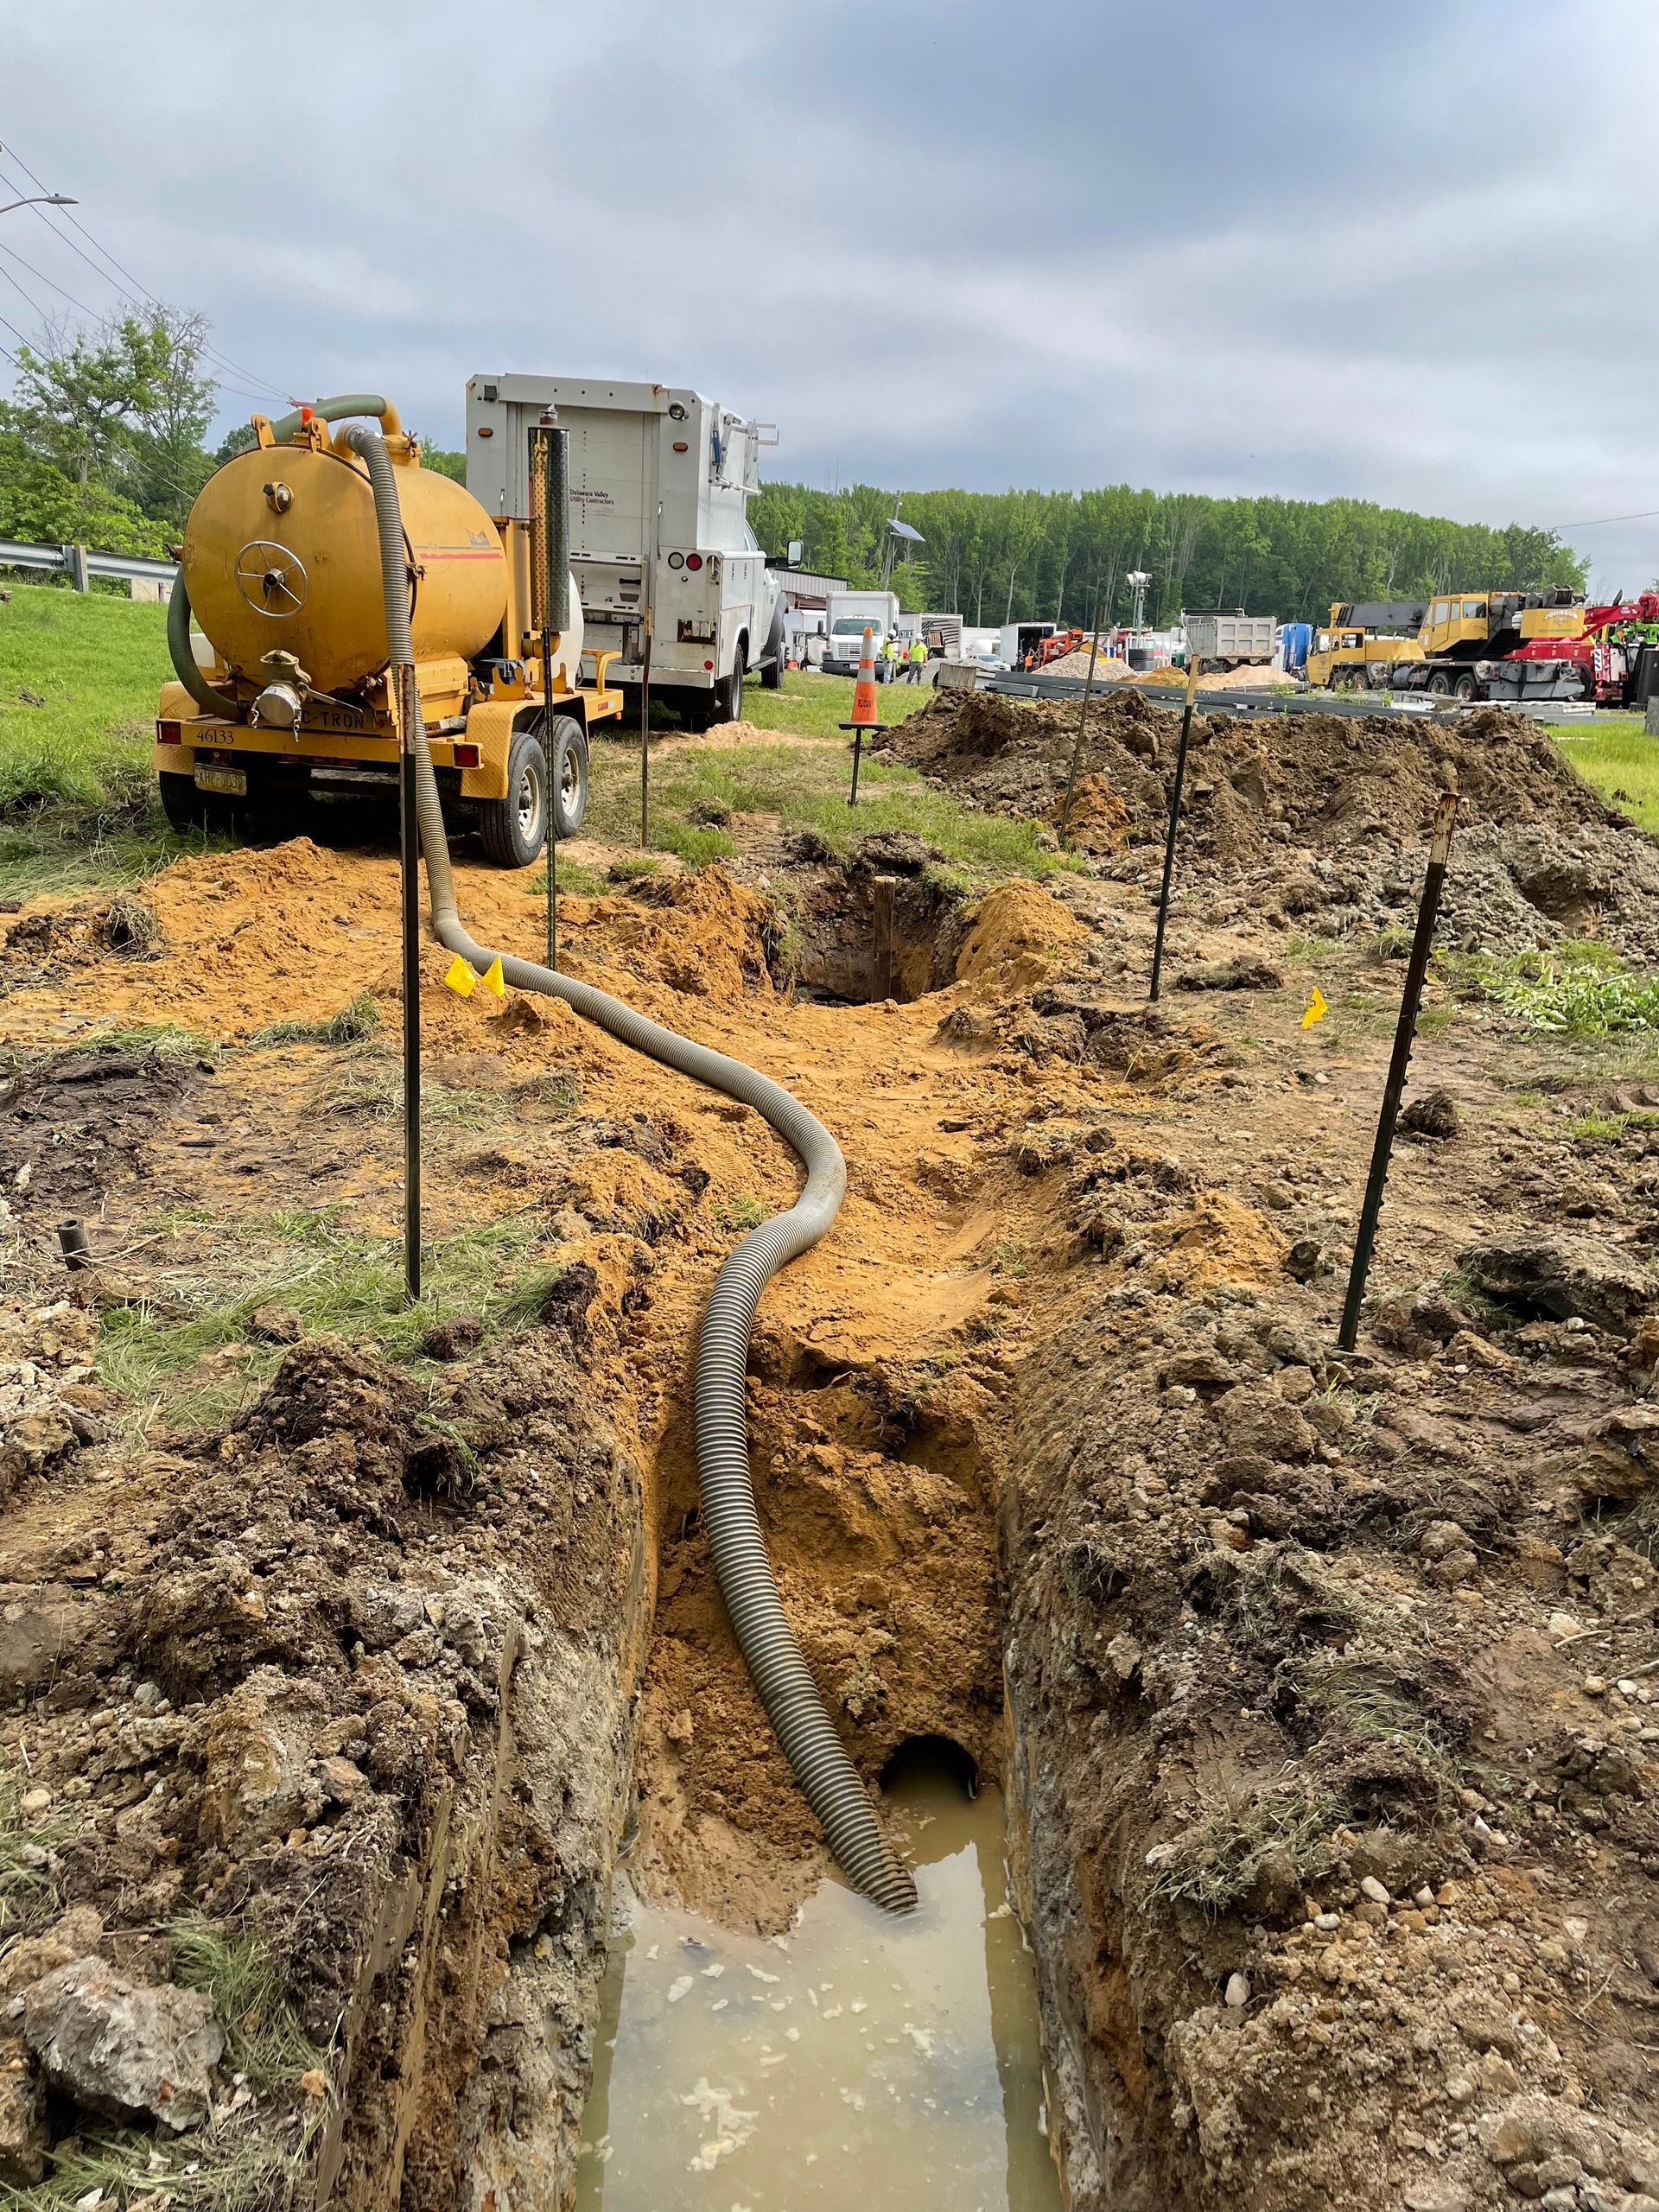 A vacuum truck is pumping water into a muddy trench.